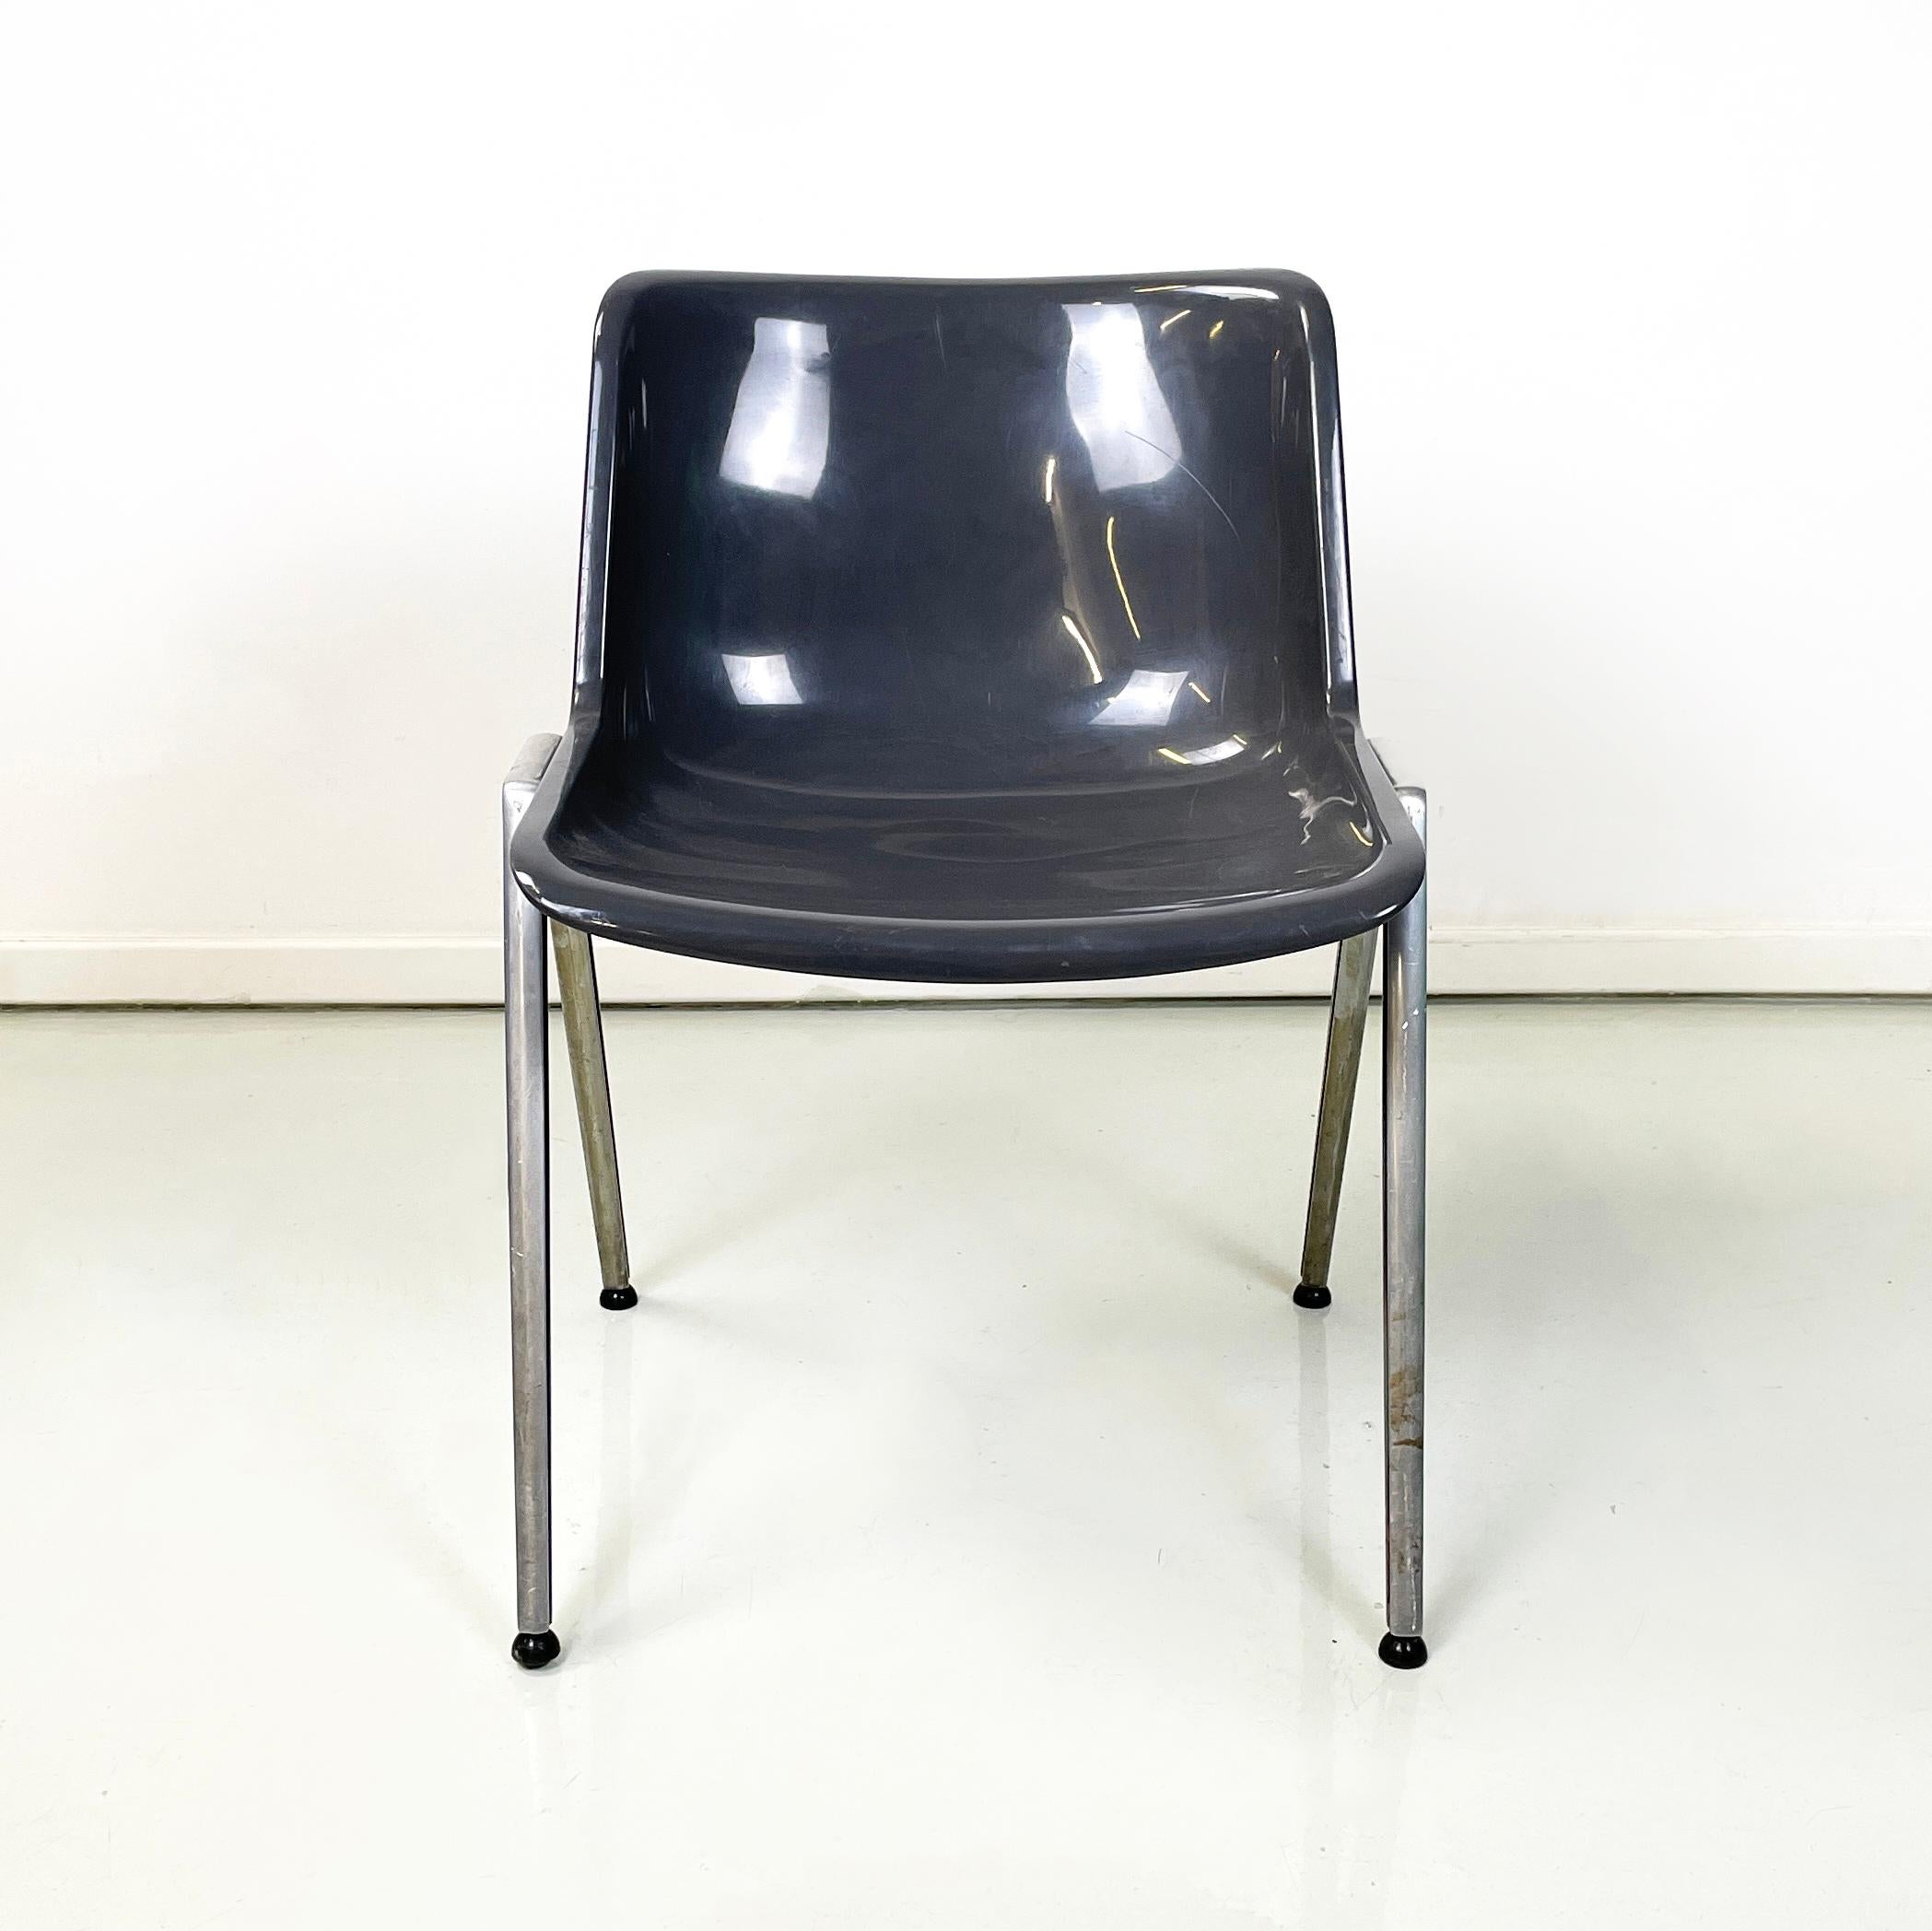 Italian modern Gray plastic aluminum Chair Modus SM 203 by Osvaldo Borsani for Tecno, 1980s
Chair mod. Modus SM 203 with seat and backrest composed of a curved gray plastic monocoque. The aluminum legs are squared. Round black rubber feet.